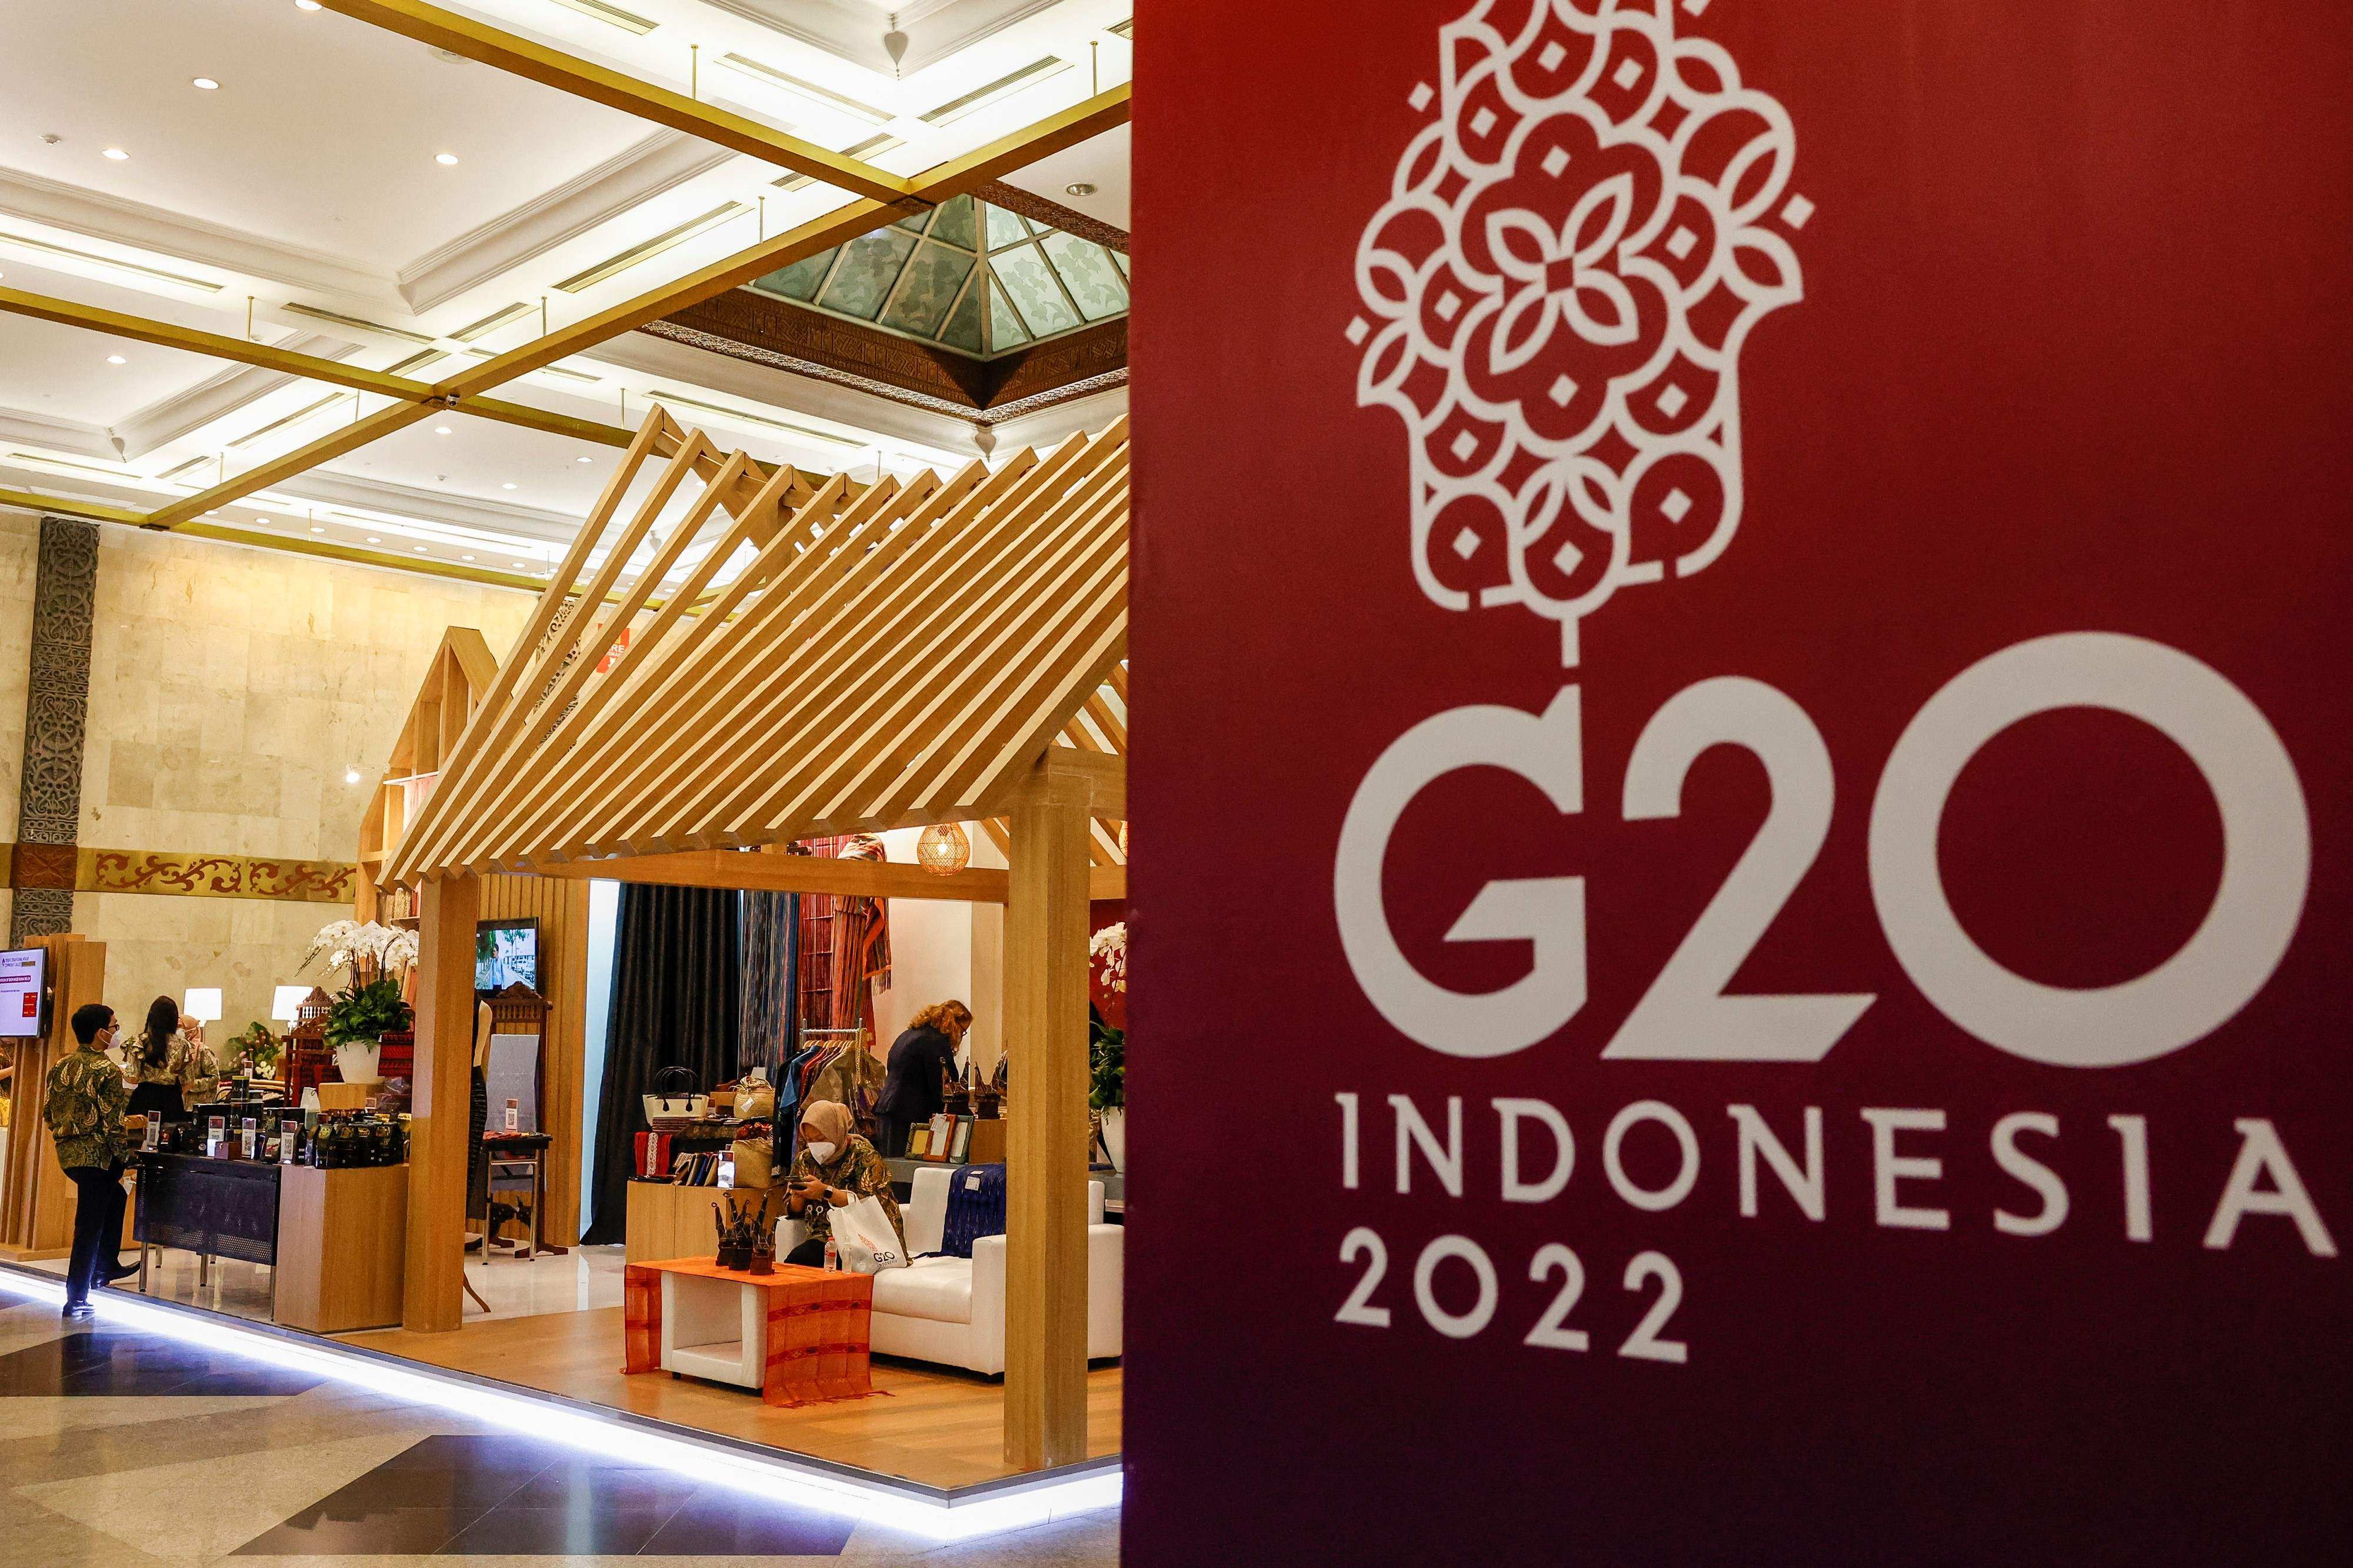 Officials prepare exhibition stands at a venue for a G20 meeting in Jakarta. Photo: AFP